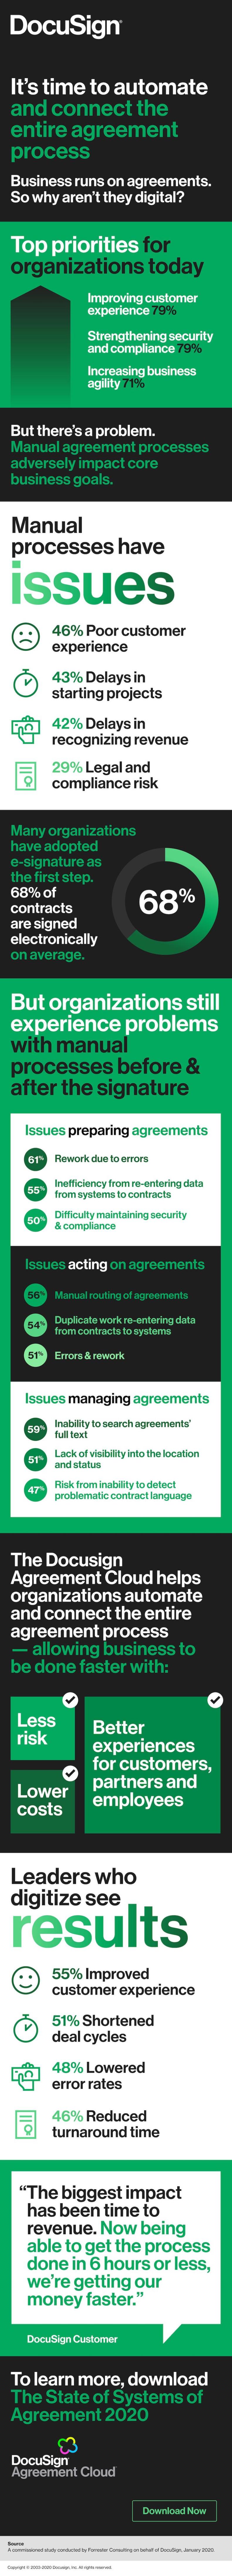 DocuSign State of Systems of Agreements 2020 Infographic